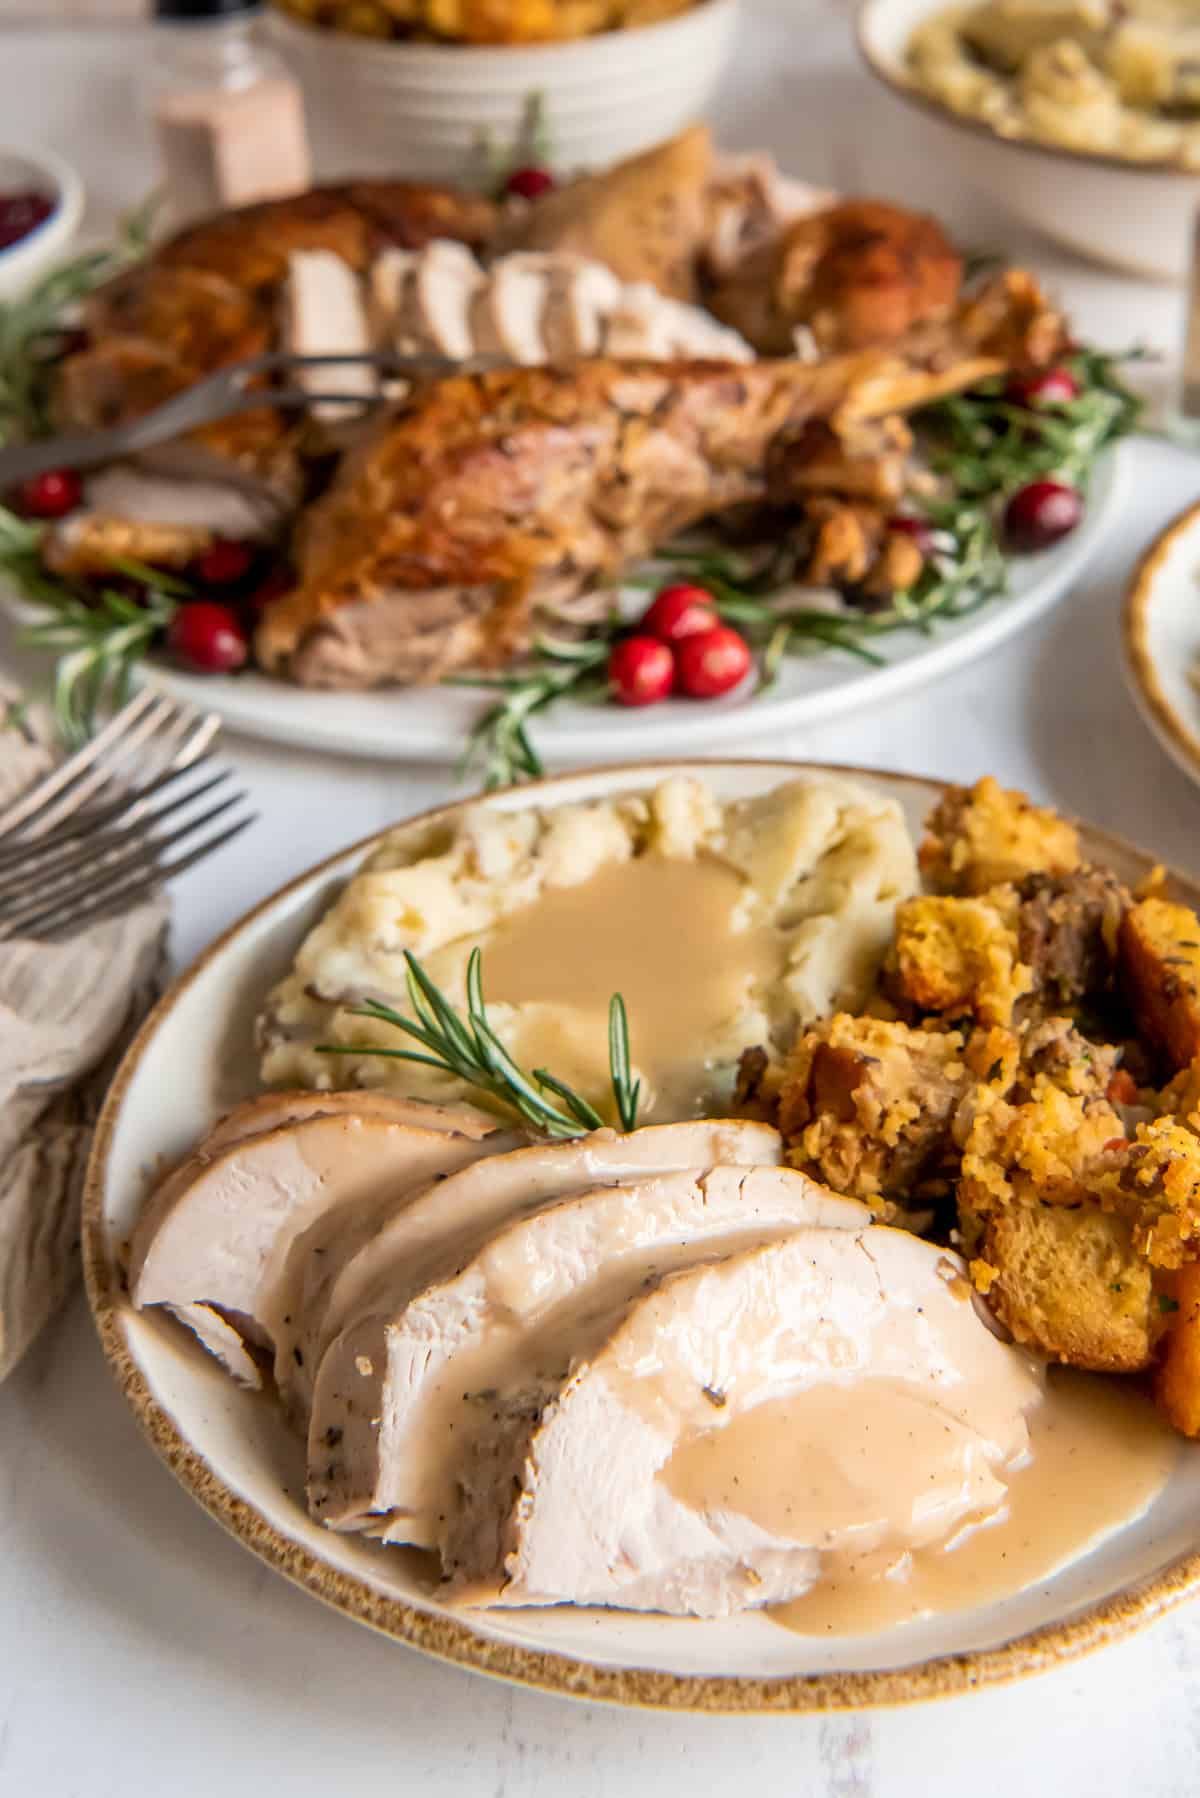 A plate with turkey, mashed potatoes, and gravy.